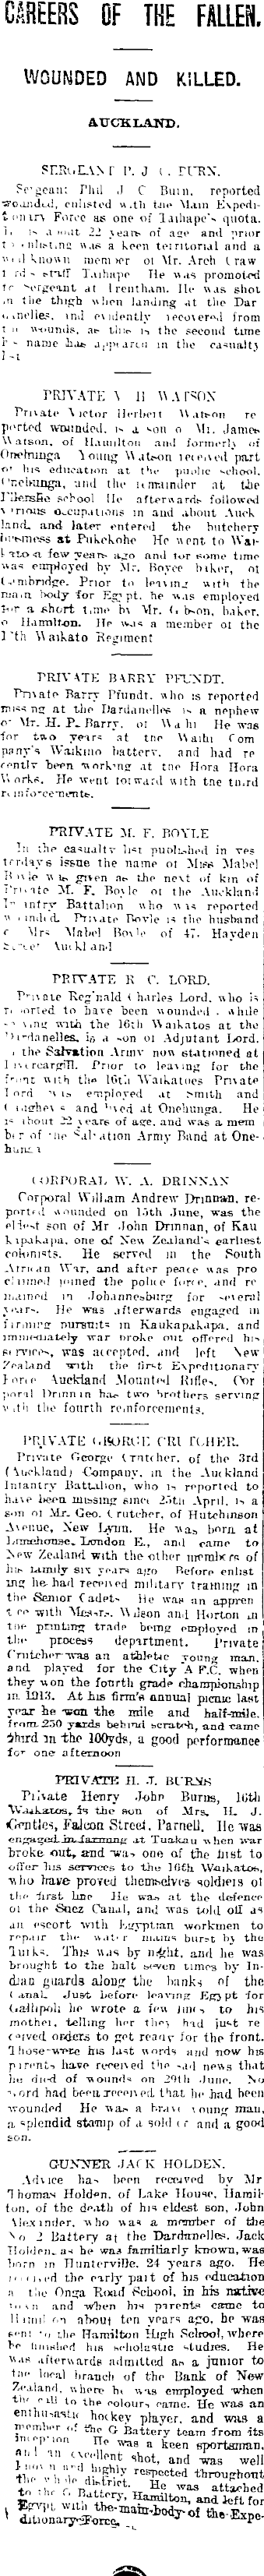 Papers Past Newspapers Auckland Star 16 July 1915 The Roll Of Honour